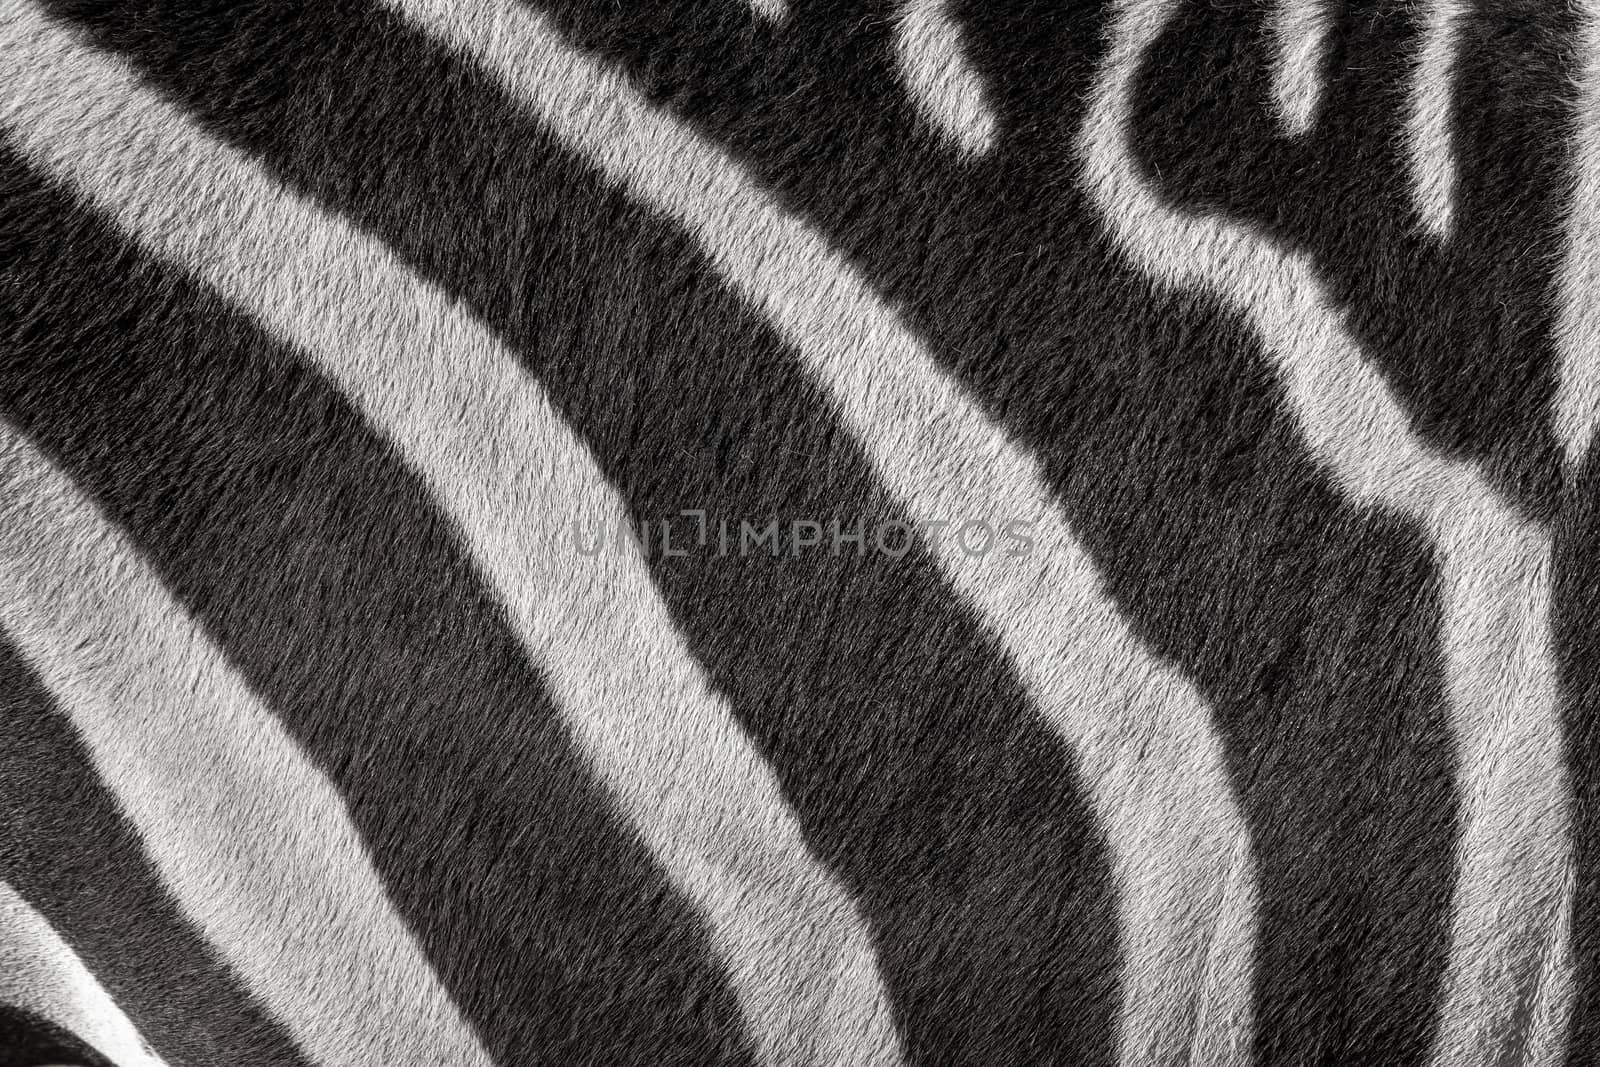 Zebra pattern with black and white stripes